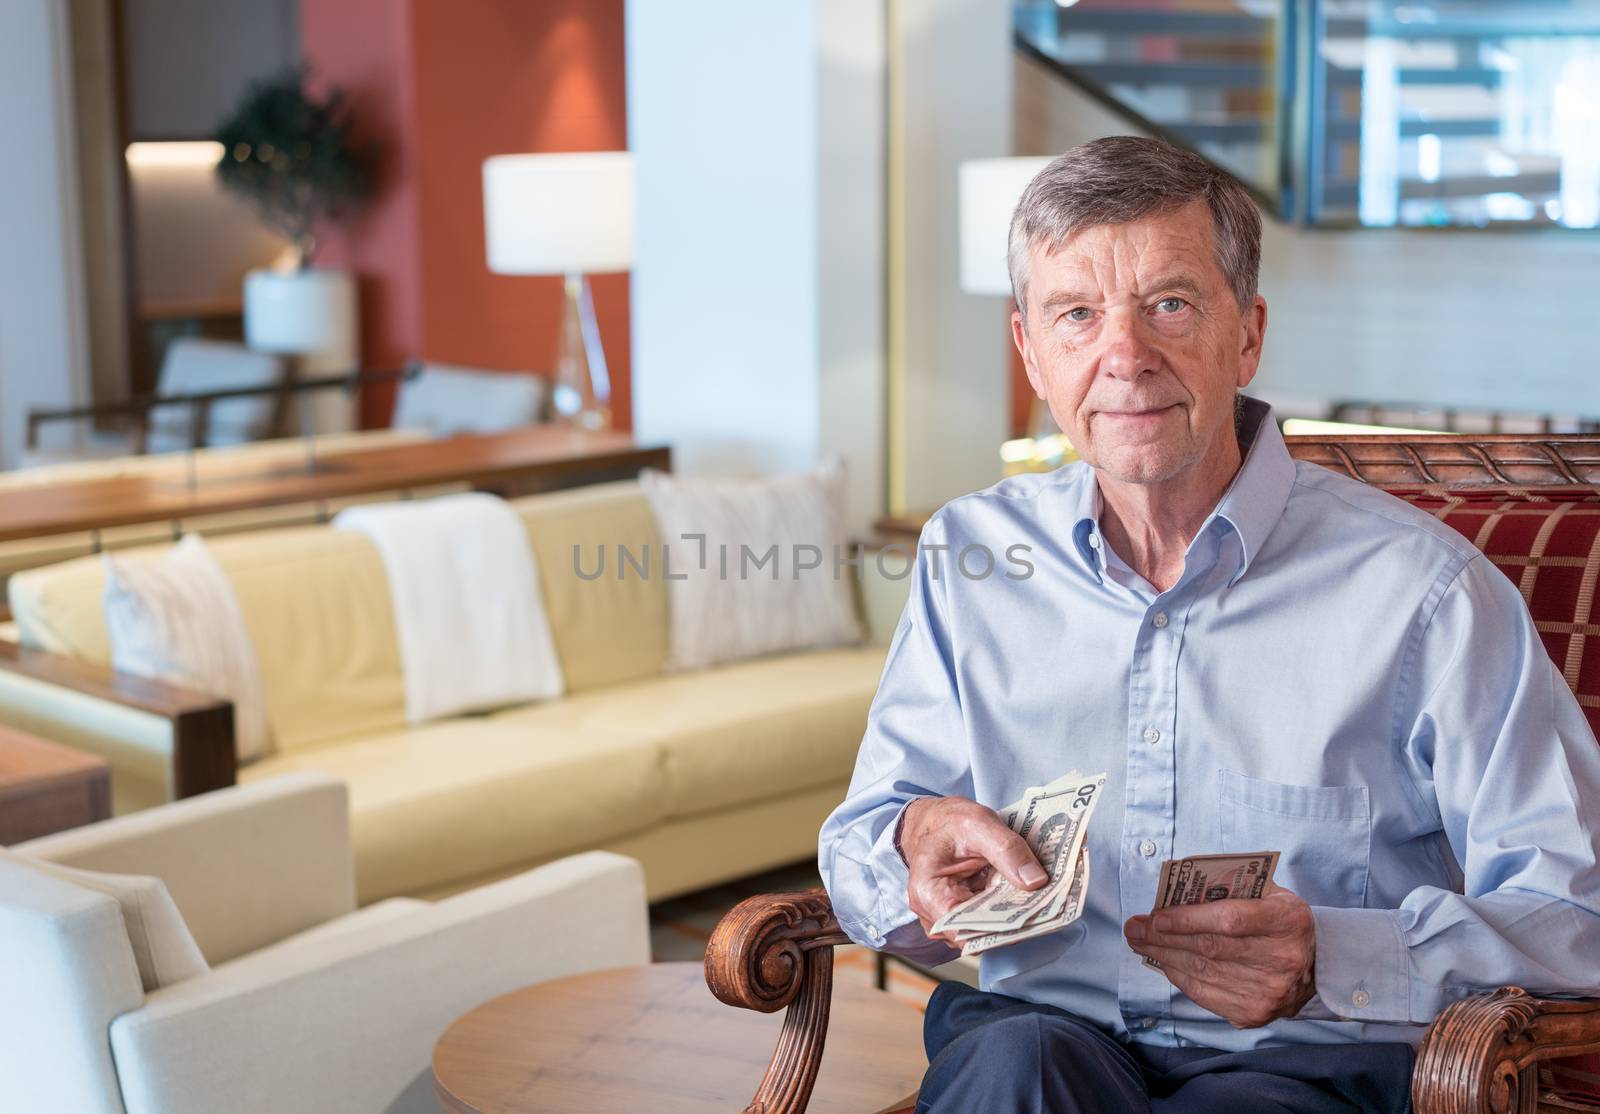 Senior man facing camera and holding US dollar bills as though handing to viewer by steheap